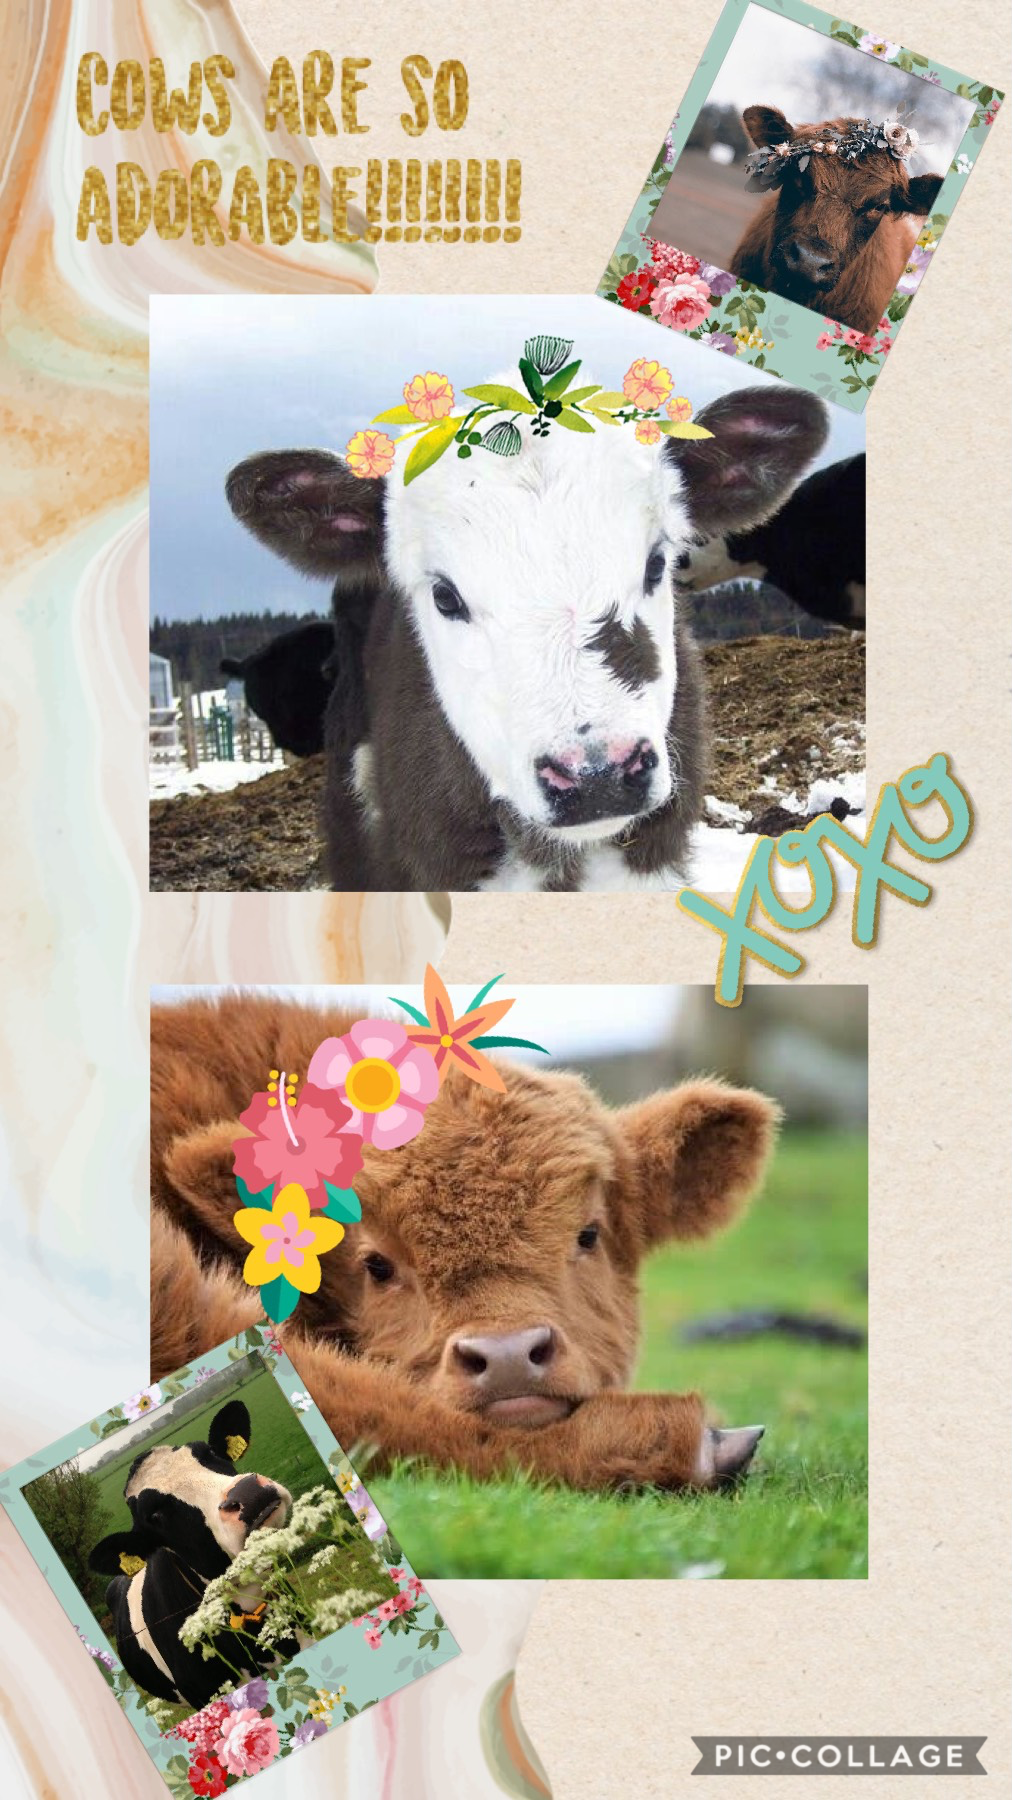 Omg I love cows they are so cute